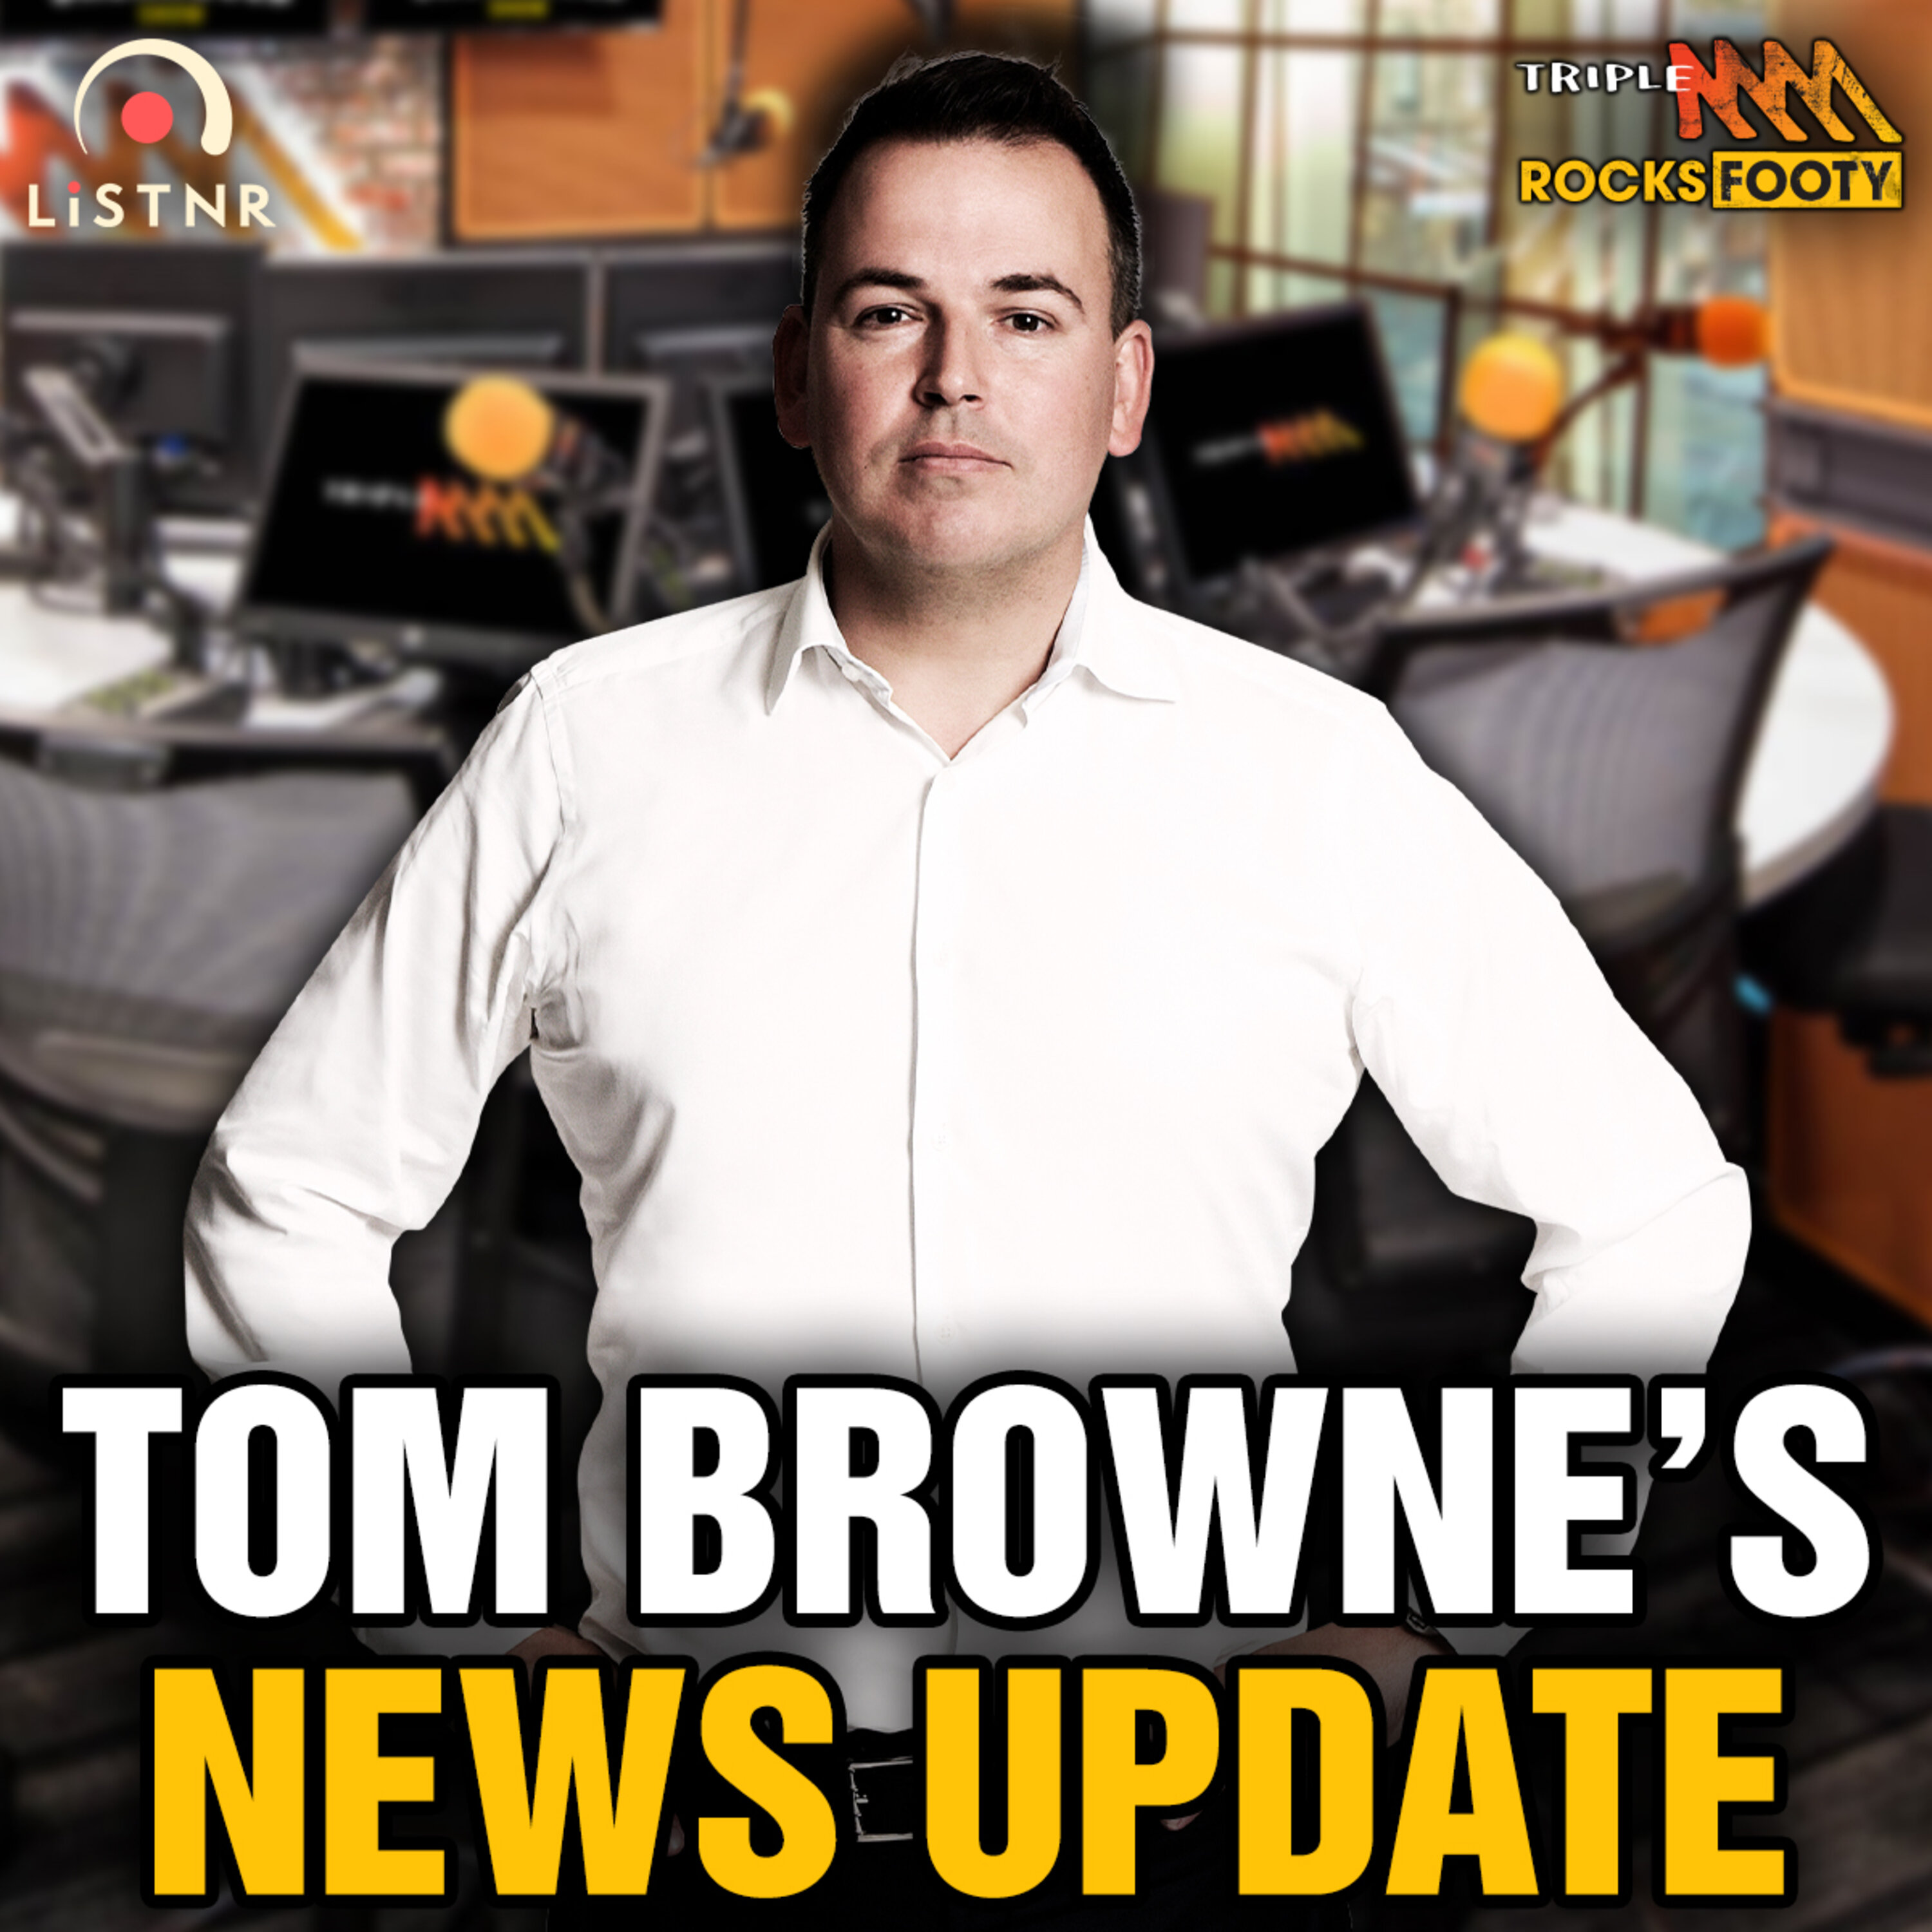 Tom Browne's News | Gunston and Rich stand themselves down, the latest on the vacant Head of Football role, the cavalry arrives for the Cats